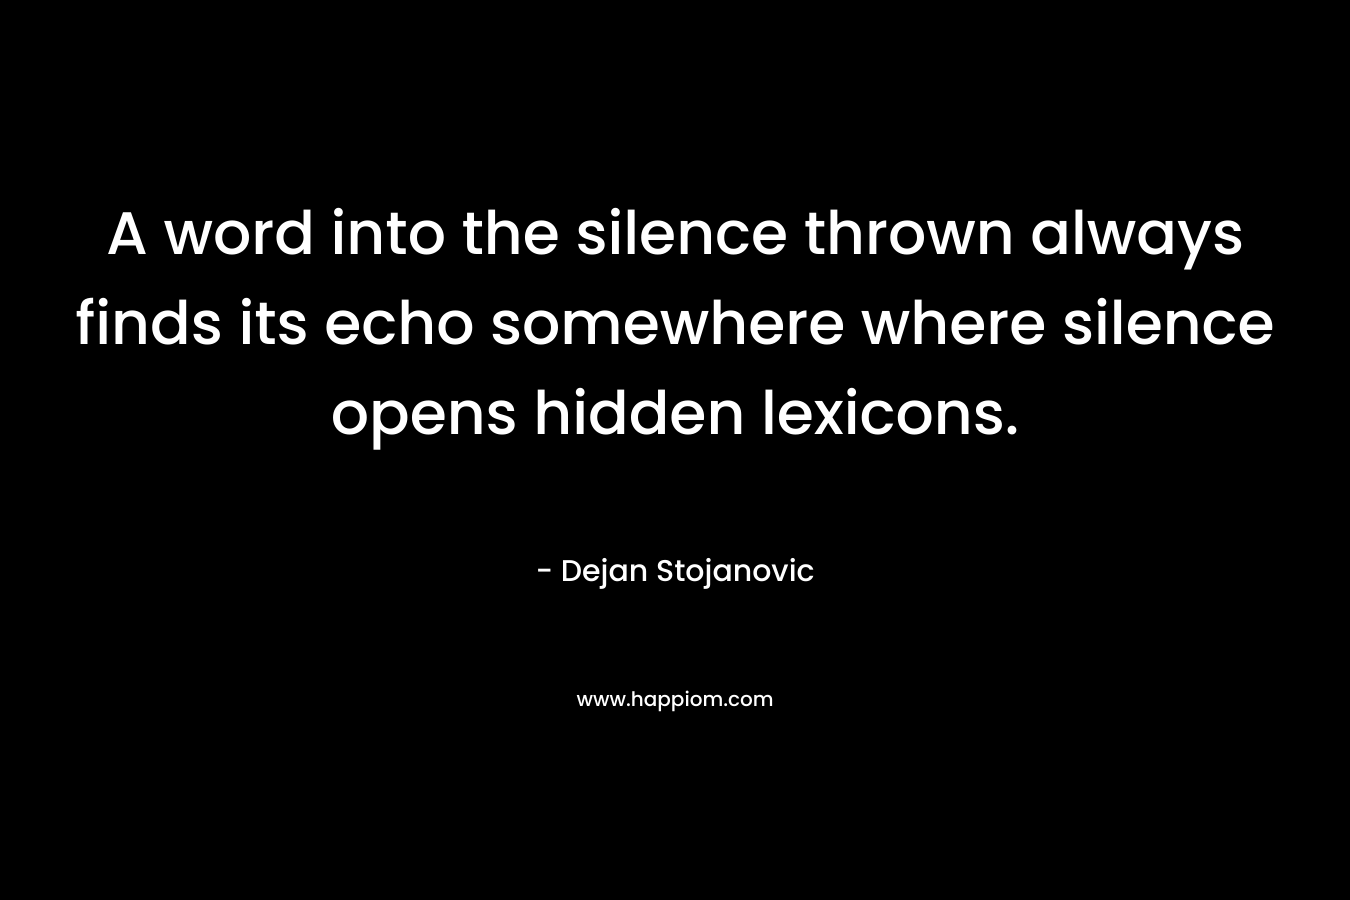 A word into the silence thrown always finds its echo somewhere where silence opens hidden lexicons.